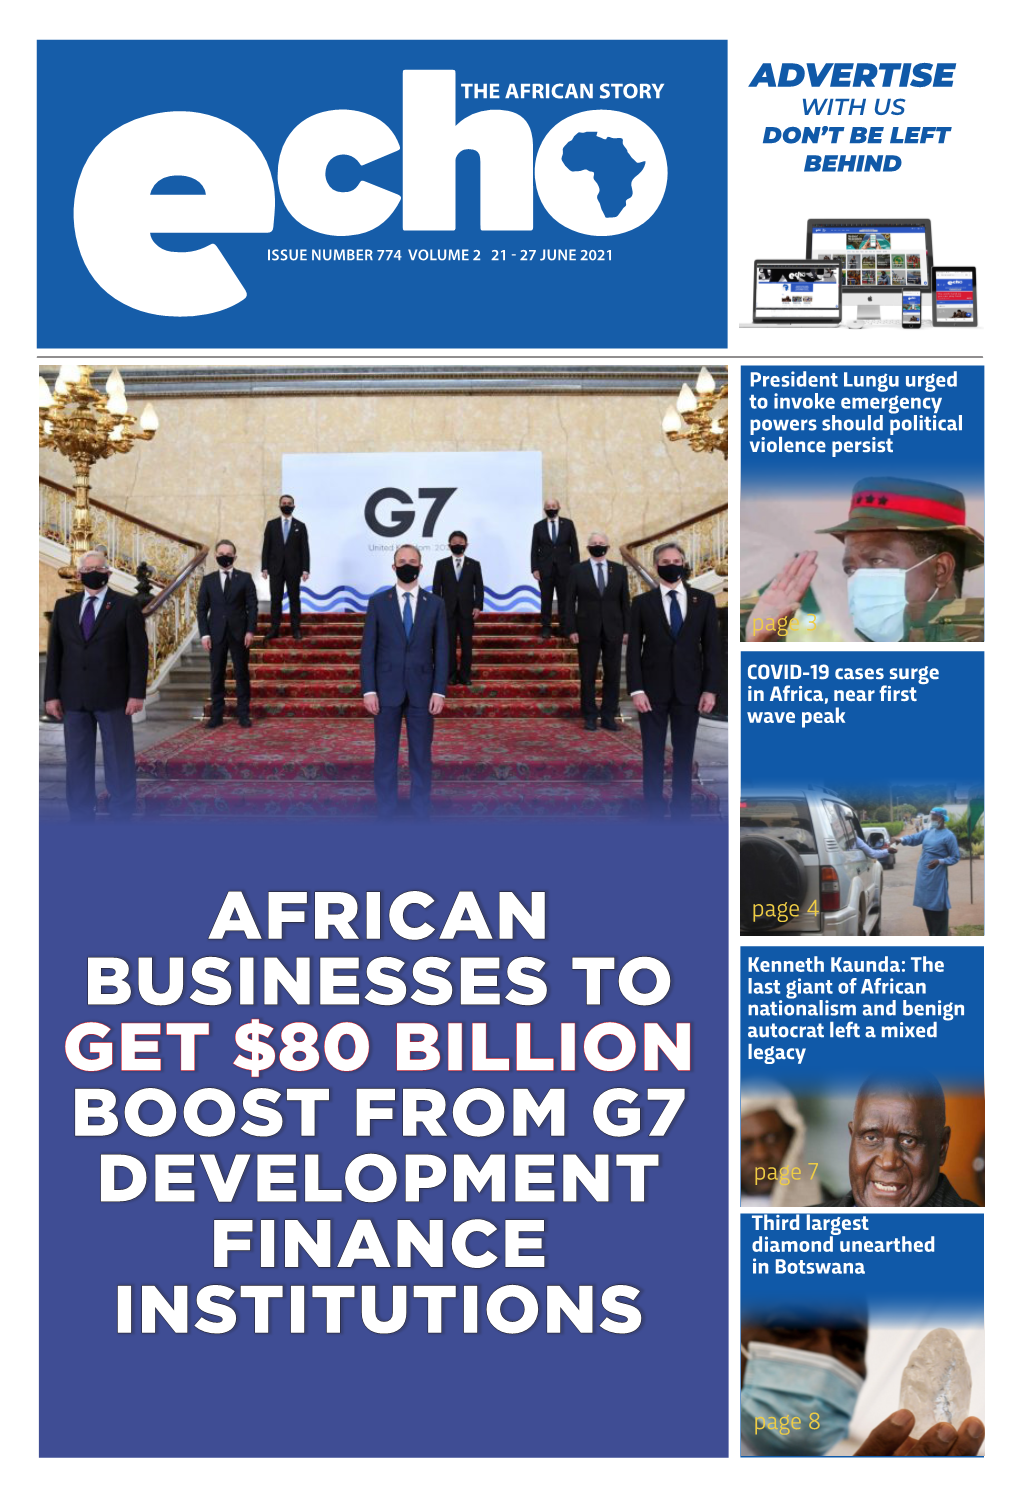 African Businesses to Get $80 Billion Boost from G7